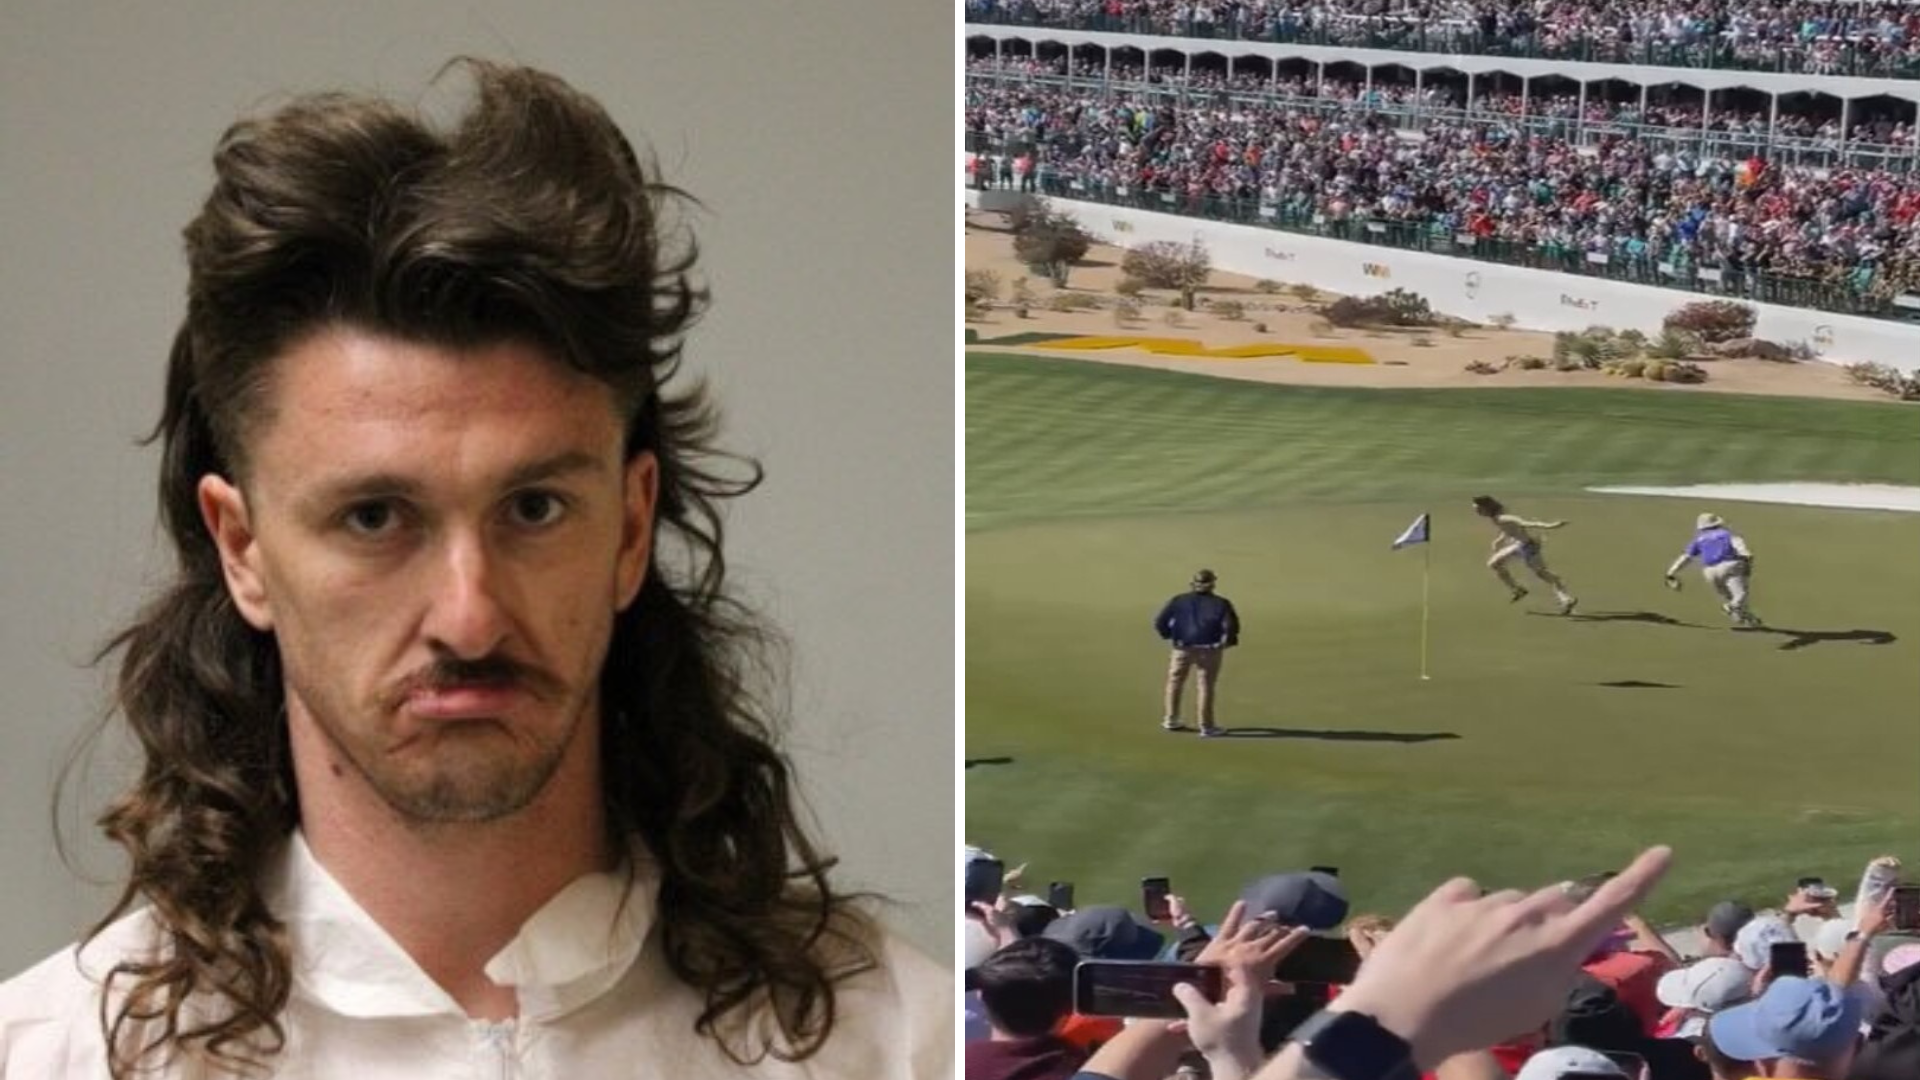 Streaker hypes up crowd, jukes out security at 16th hole of WM Phoenix Open